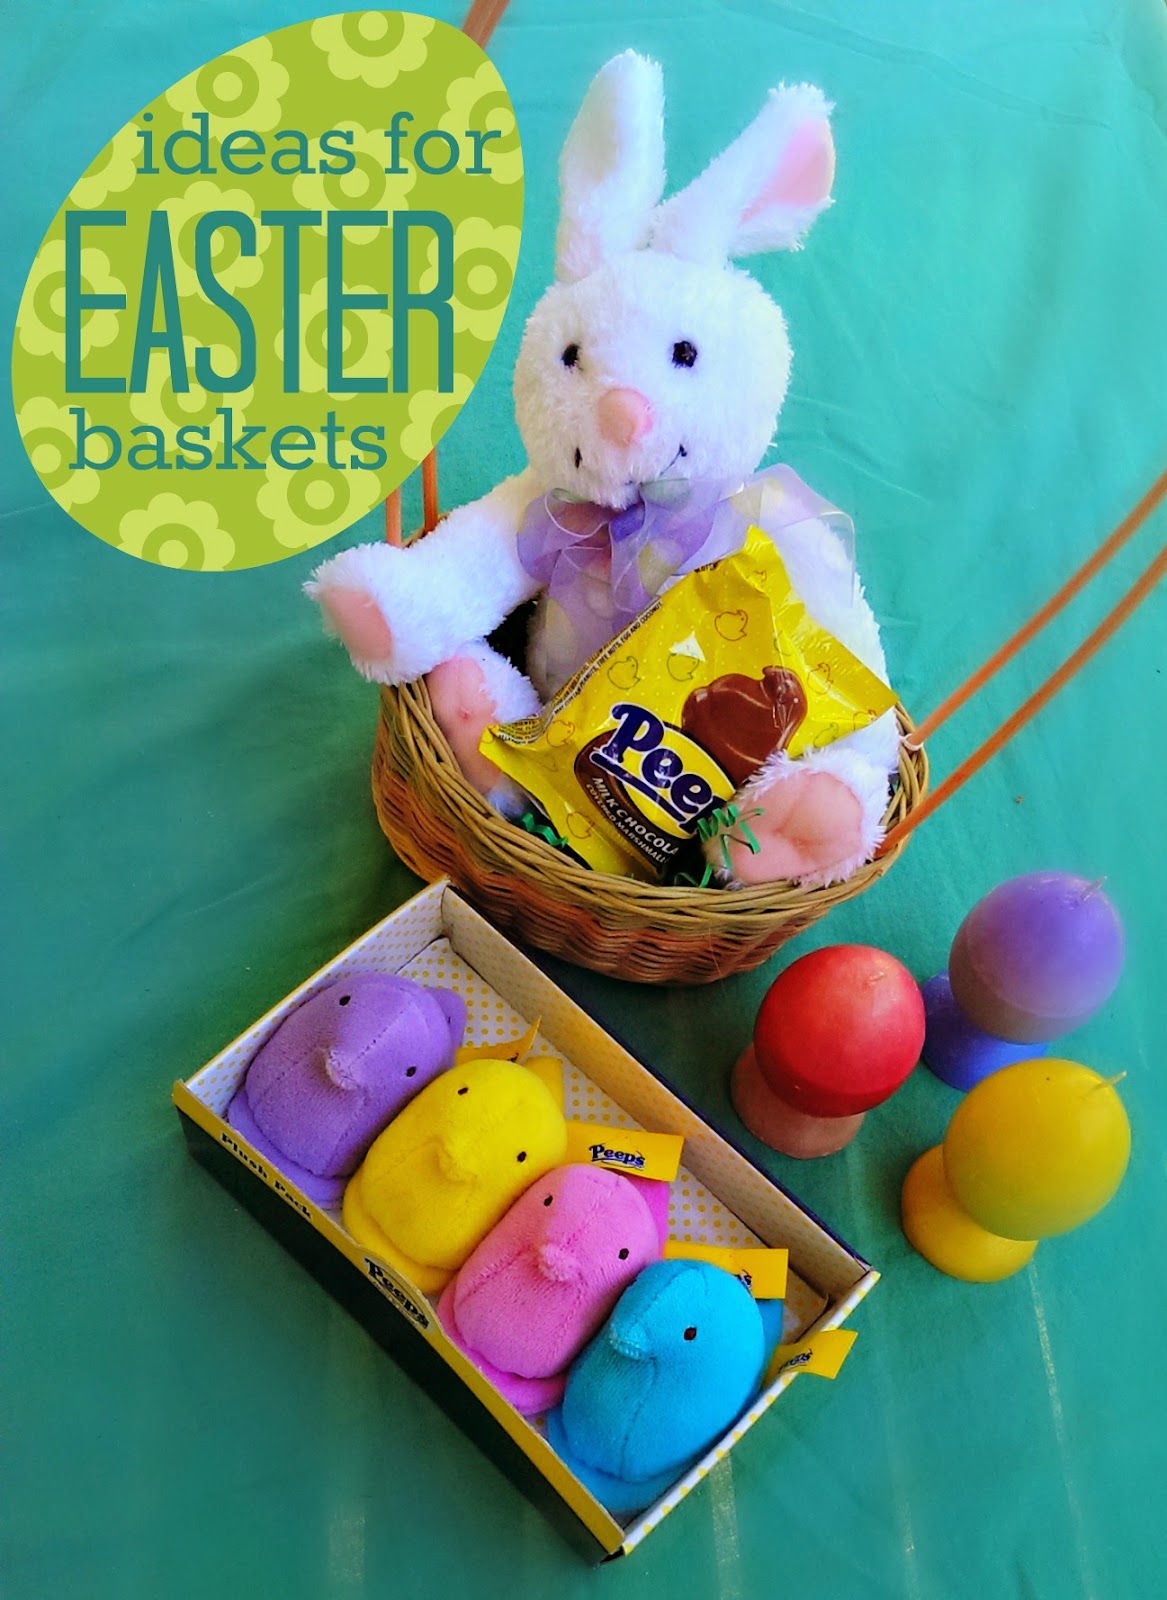 Peeps candy Easter gift baskets